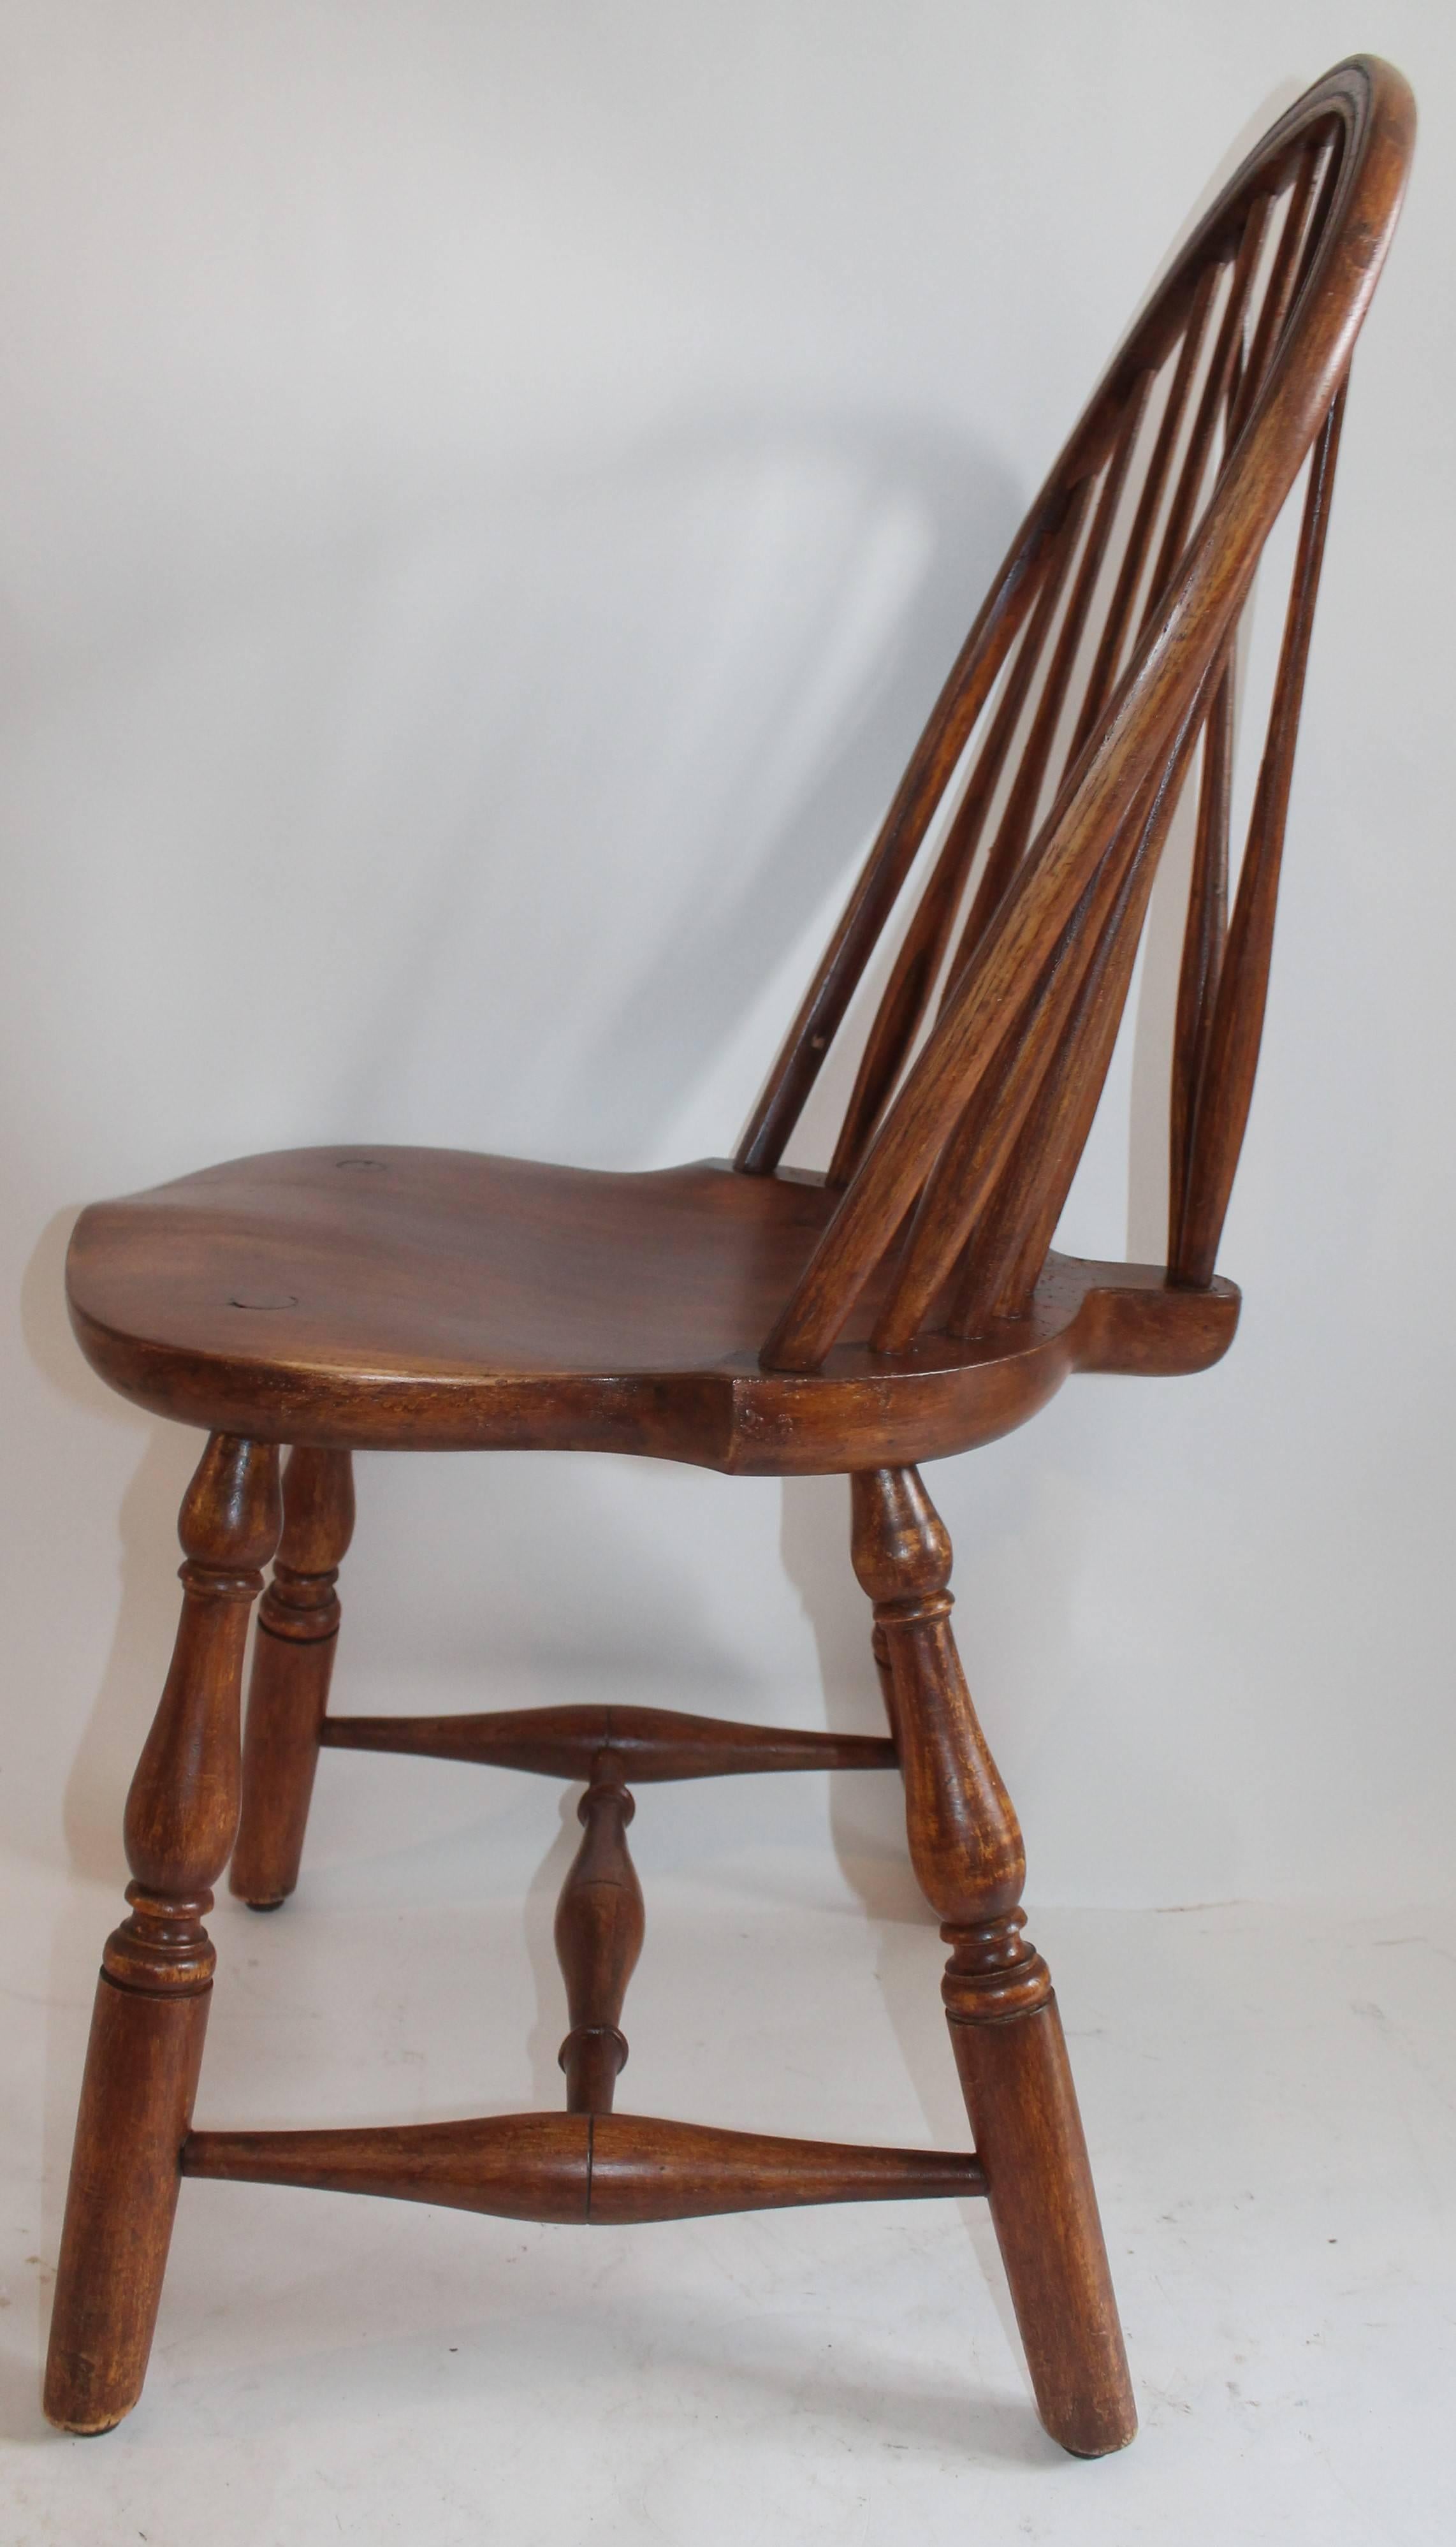 This fine example is a 20th century version of a 18th century brace back windsor chair. It is signed on the base The Marble & Shattuck Chair Co. The condition is very good and sturdy. This chair is made of maple.